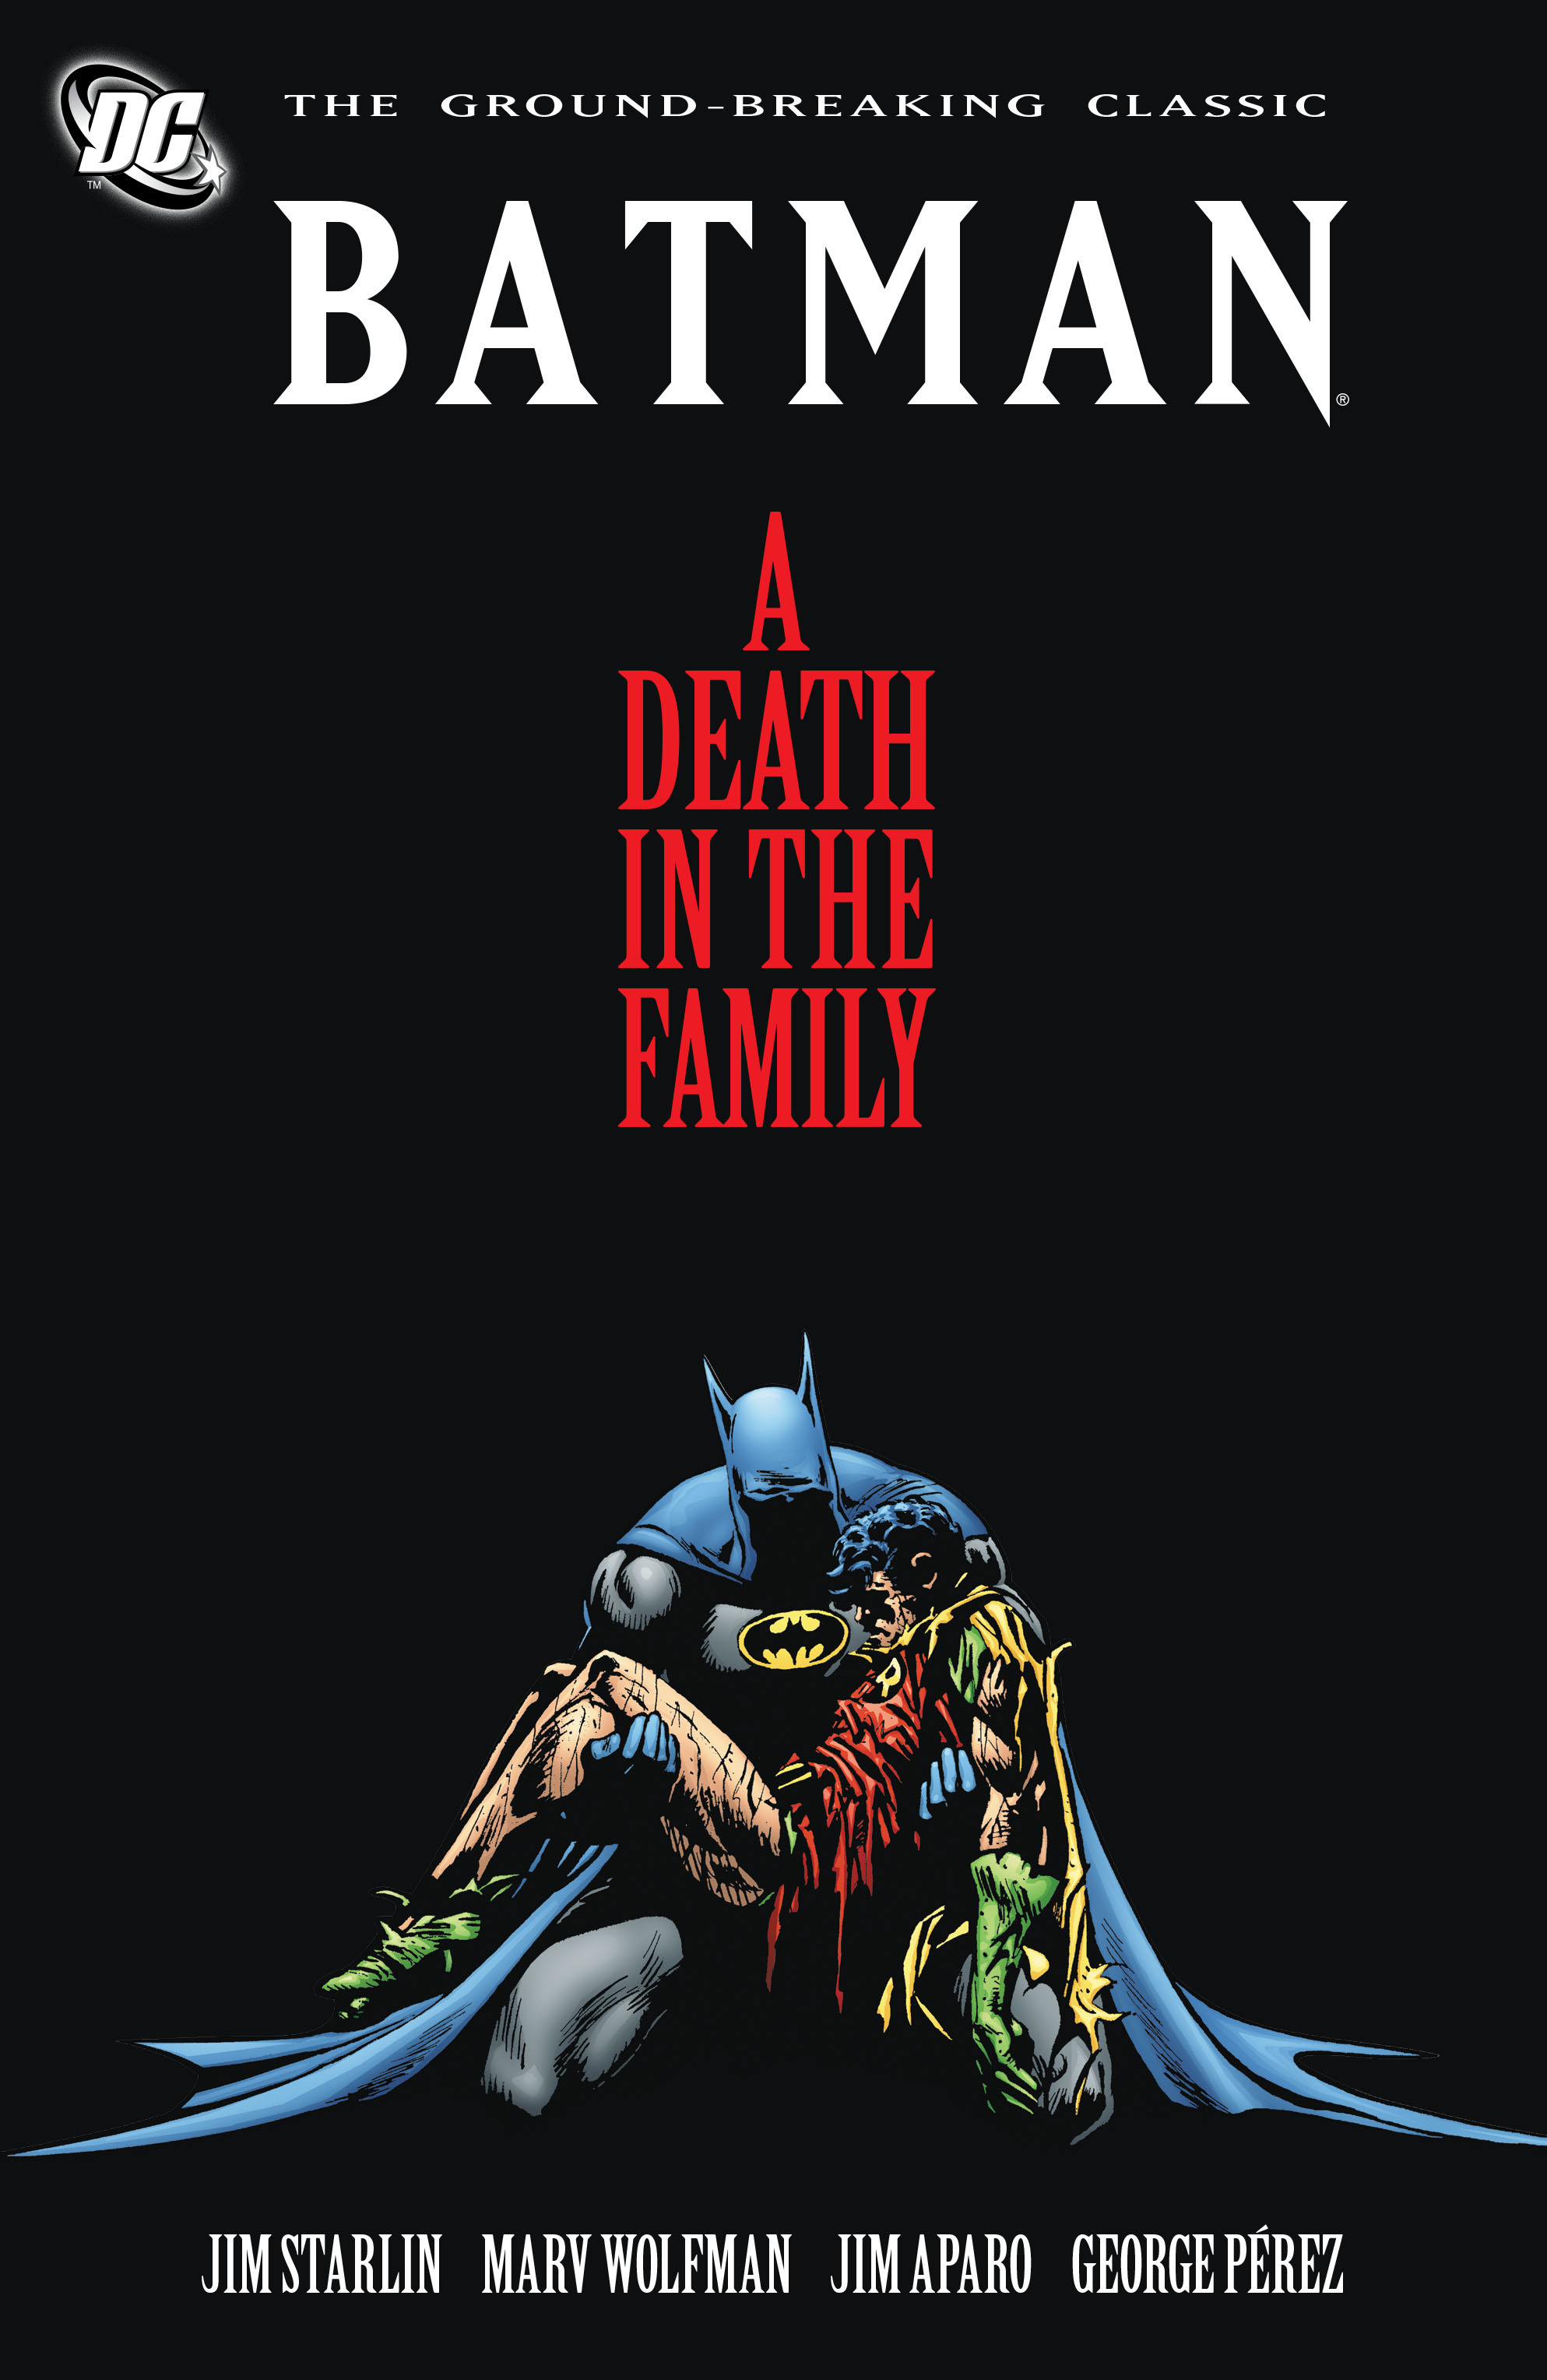 Read online Batman: A Death in the Family comic -  Issue # Full - 1